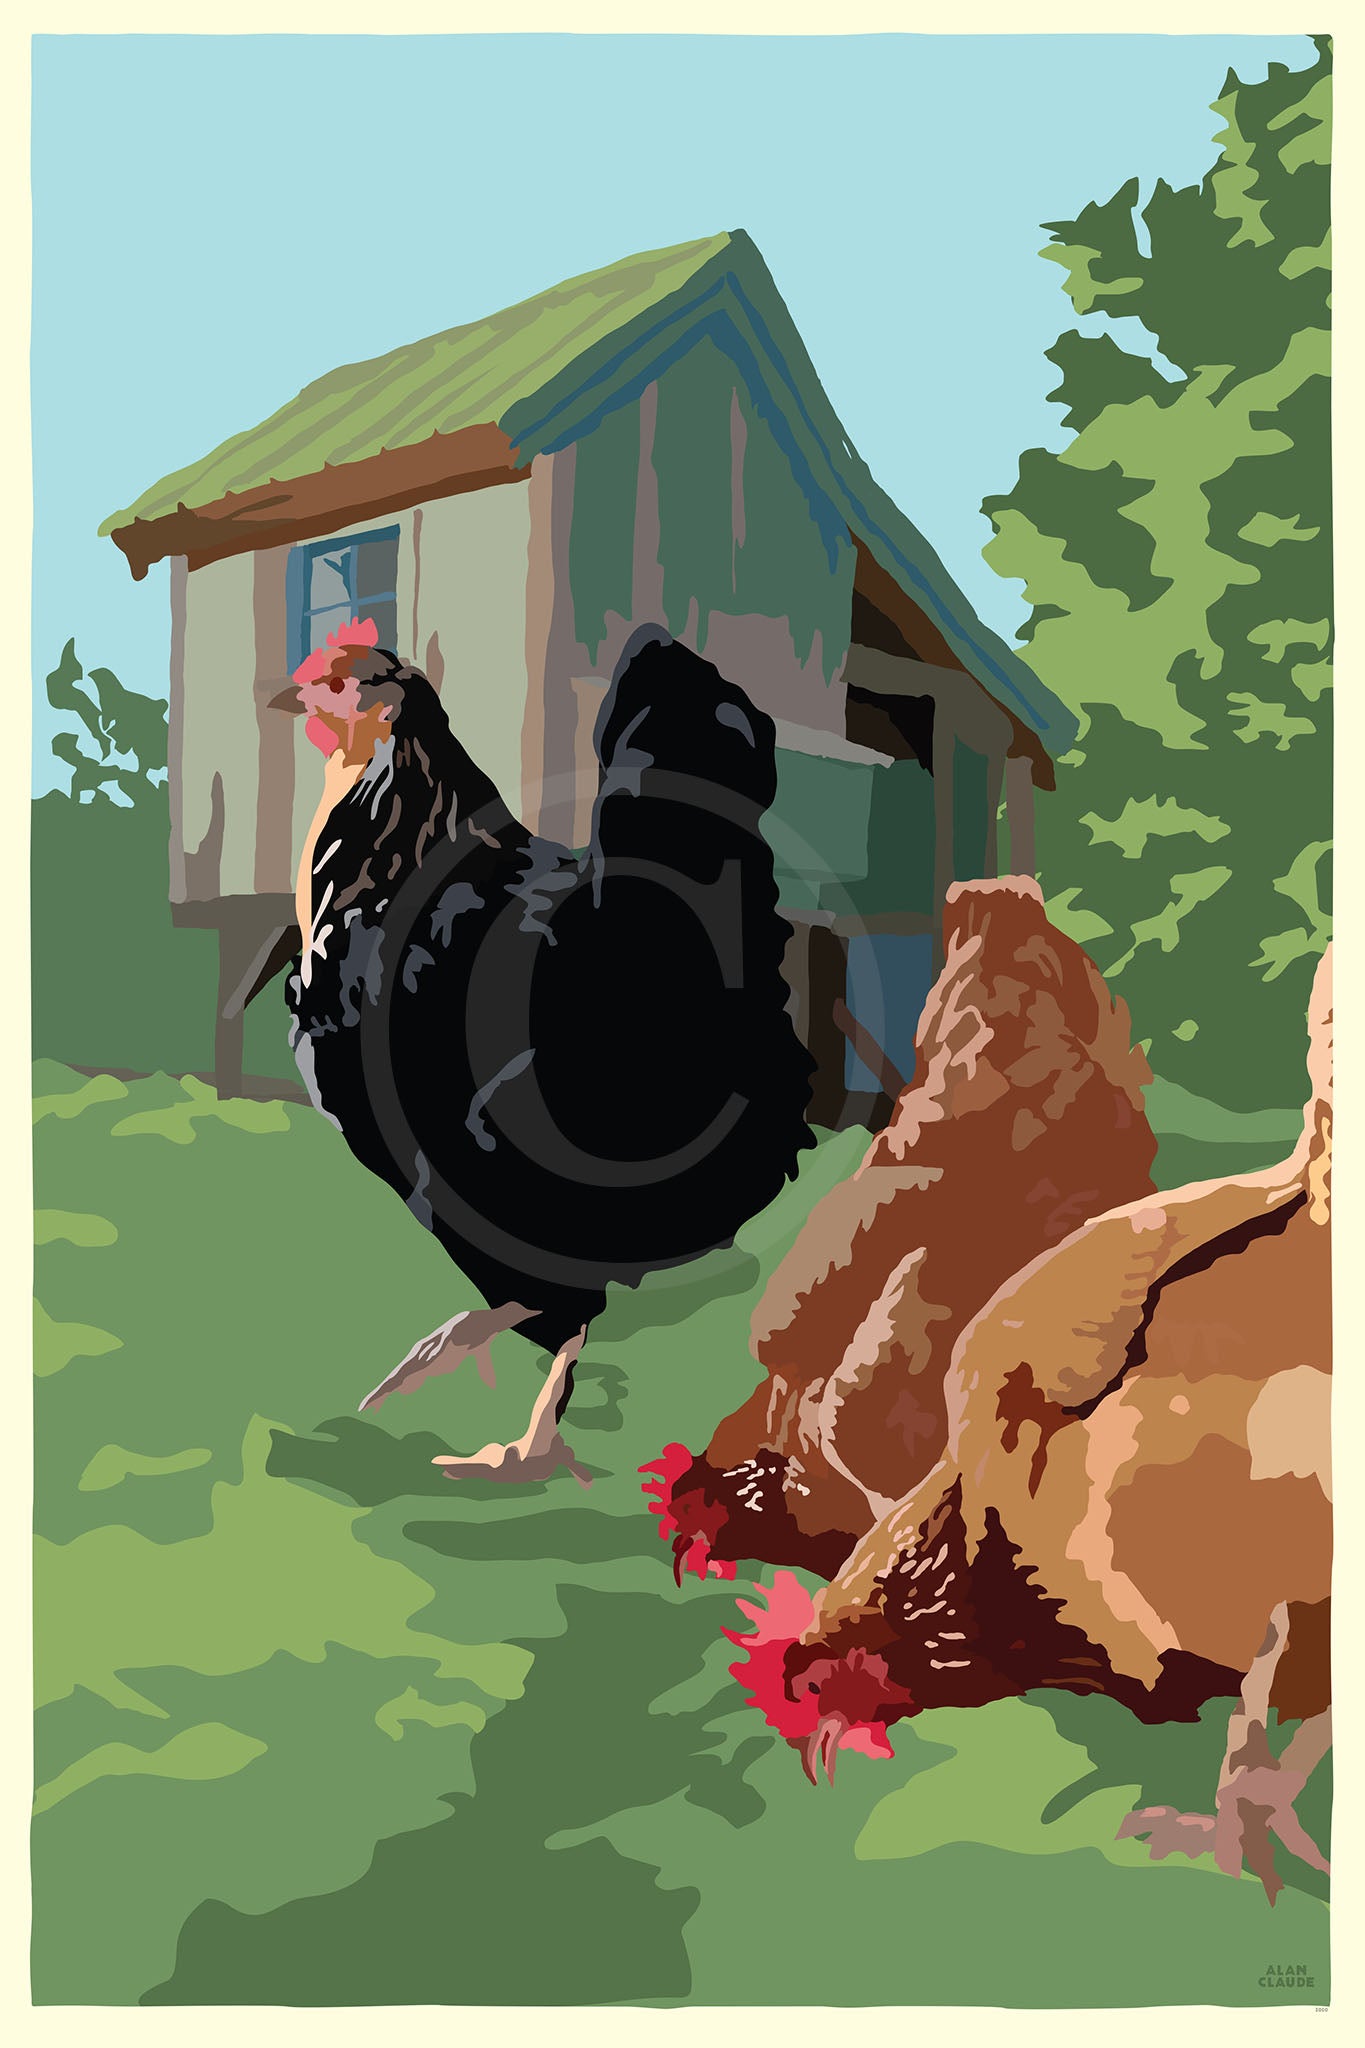 Spring Chickens Art Print 24" x 36" Wall Poster By Alan Claude - Maine